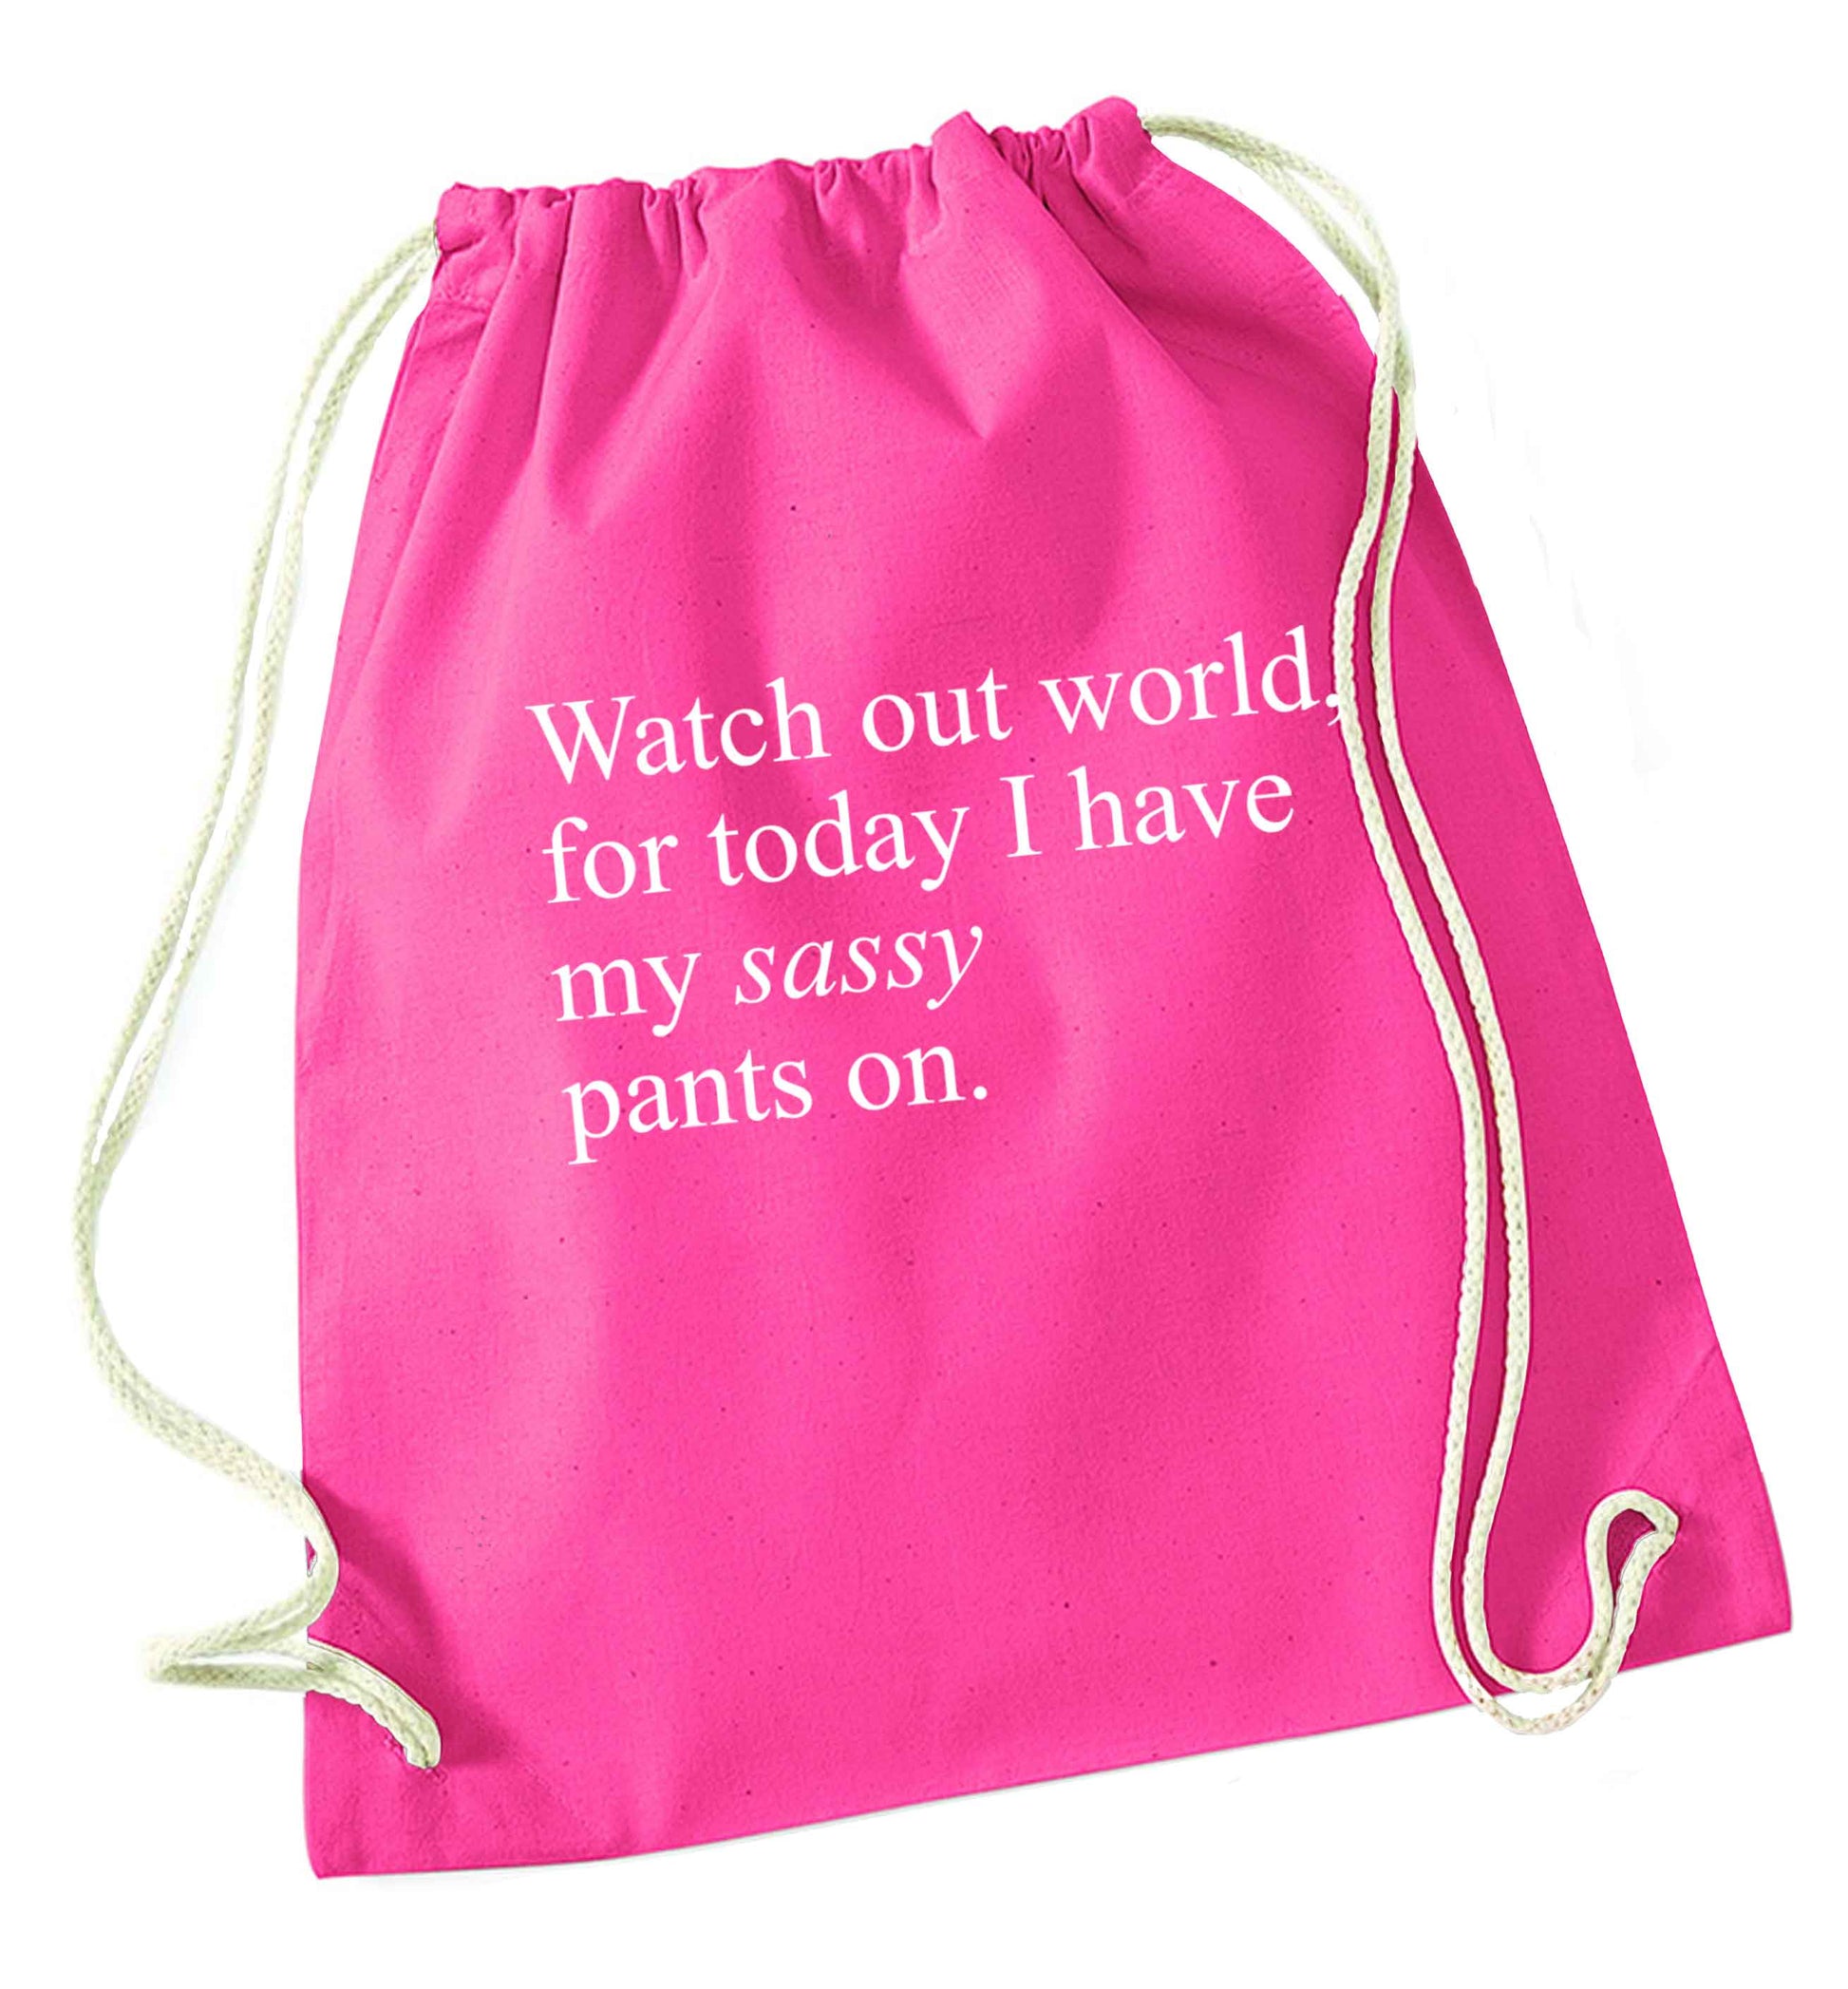 Watch out world for today I have my sassy pants on pink drawstring bag